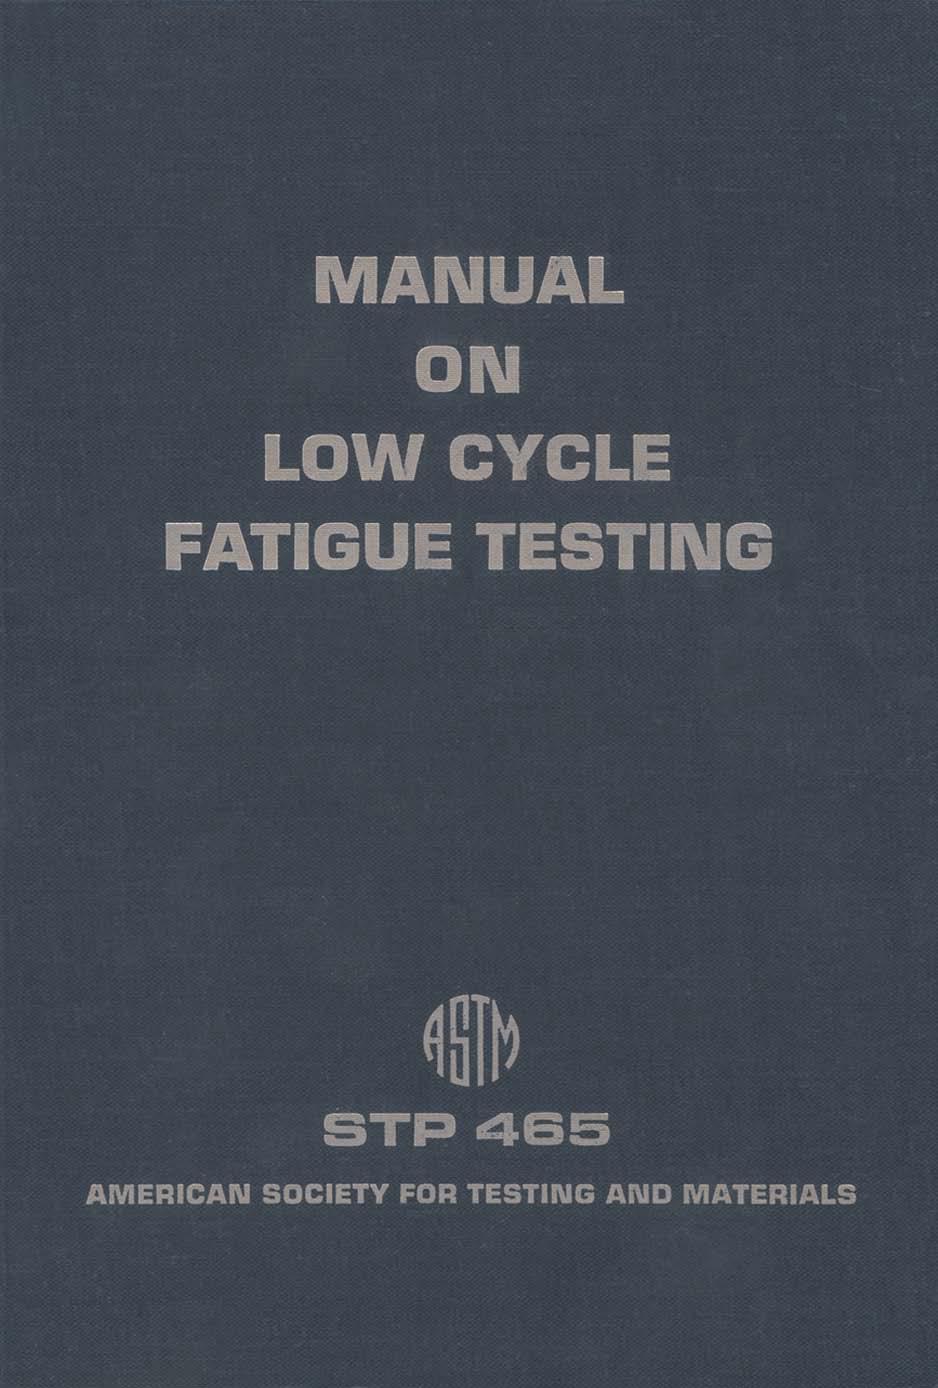 Manual on low cycle fatigue testing.